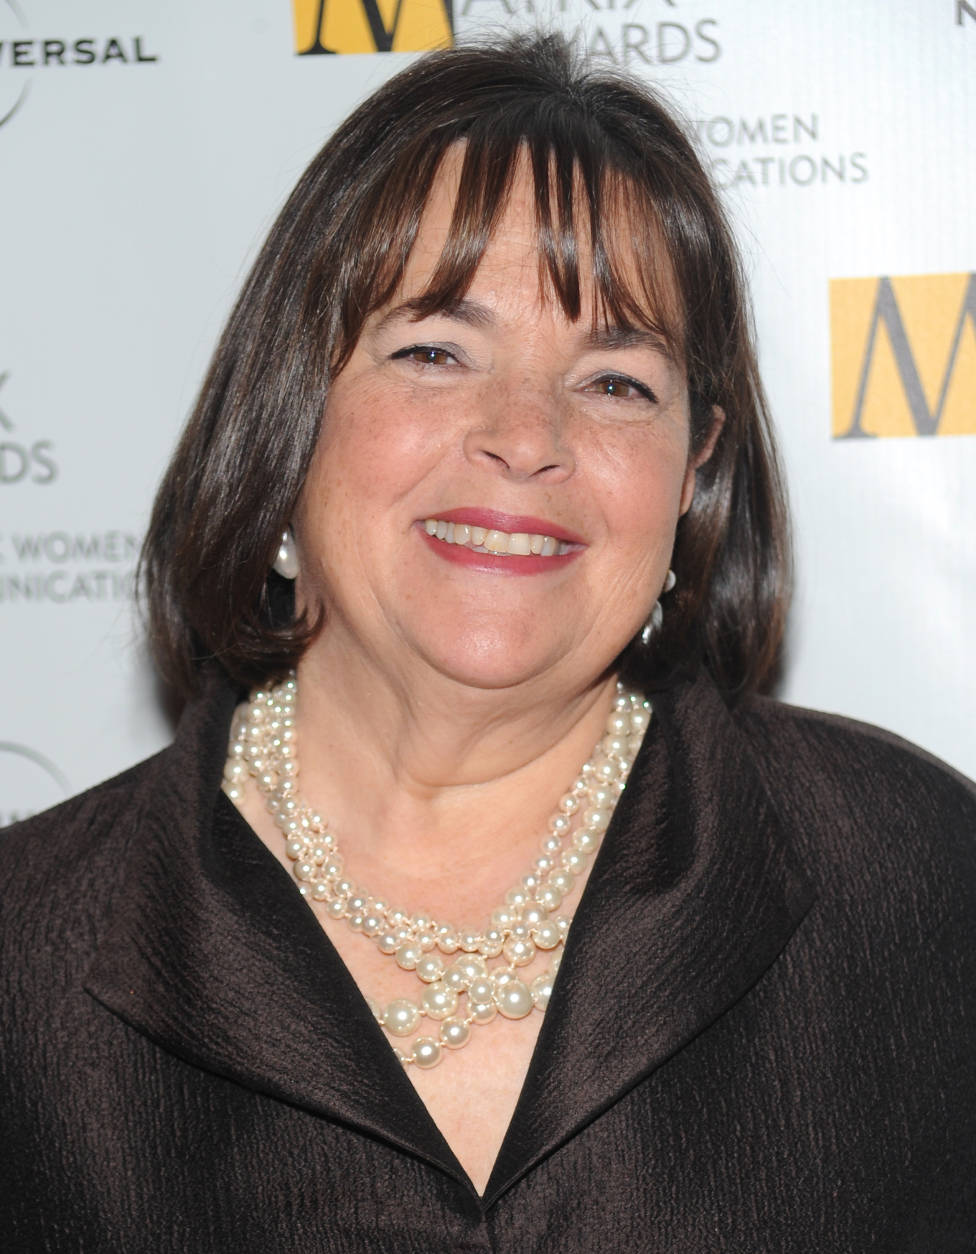 Author and Food Network host Ina Garten attends the 2010 Matrix Awards presented by the New York Women in Communications at the Waldorf-Astoria Hotel on Monday, April 19, 2010 in New York. (AP Photo/Evan Agostini)